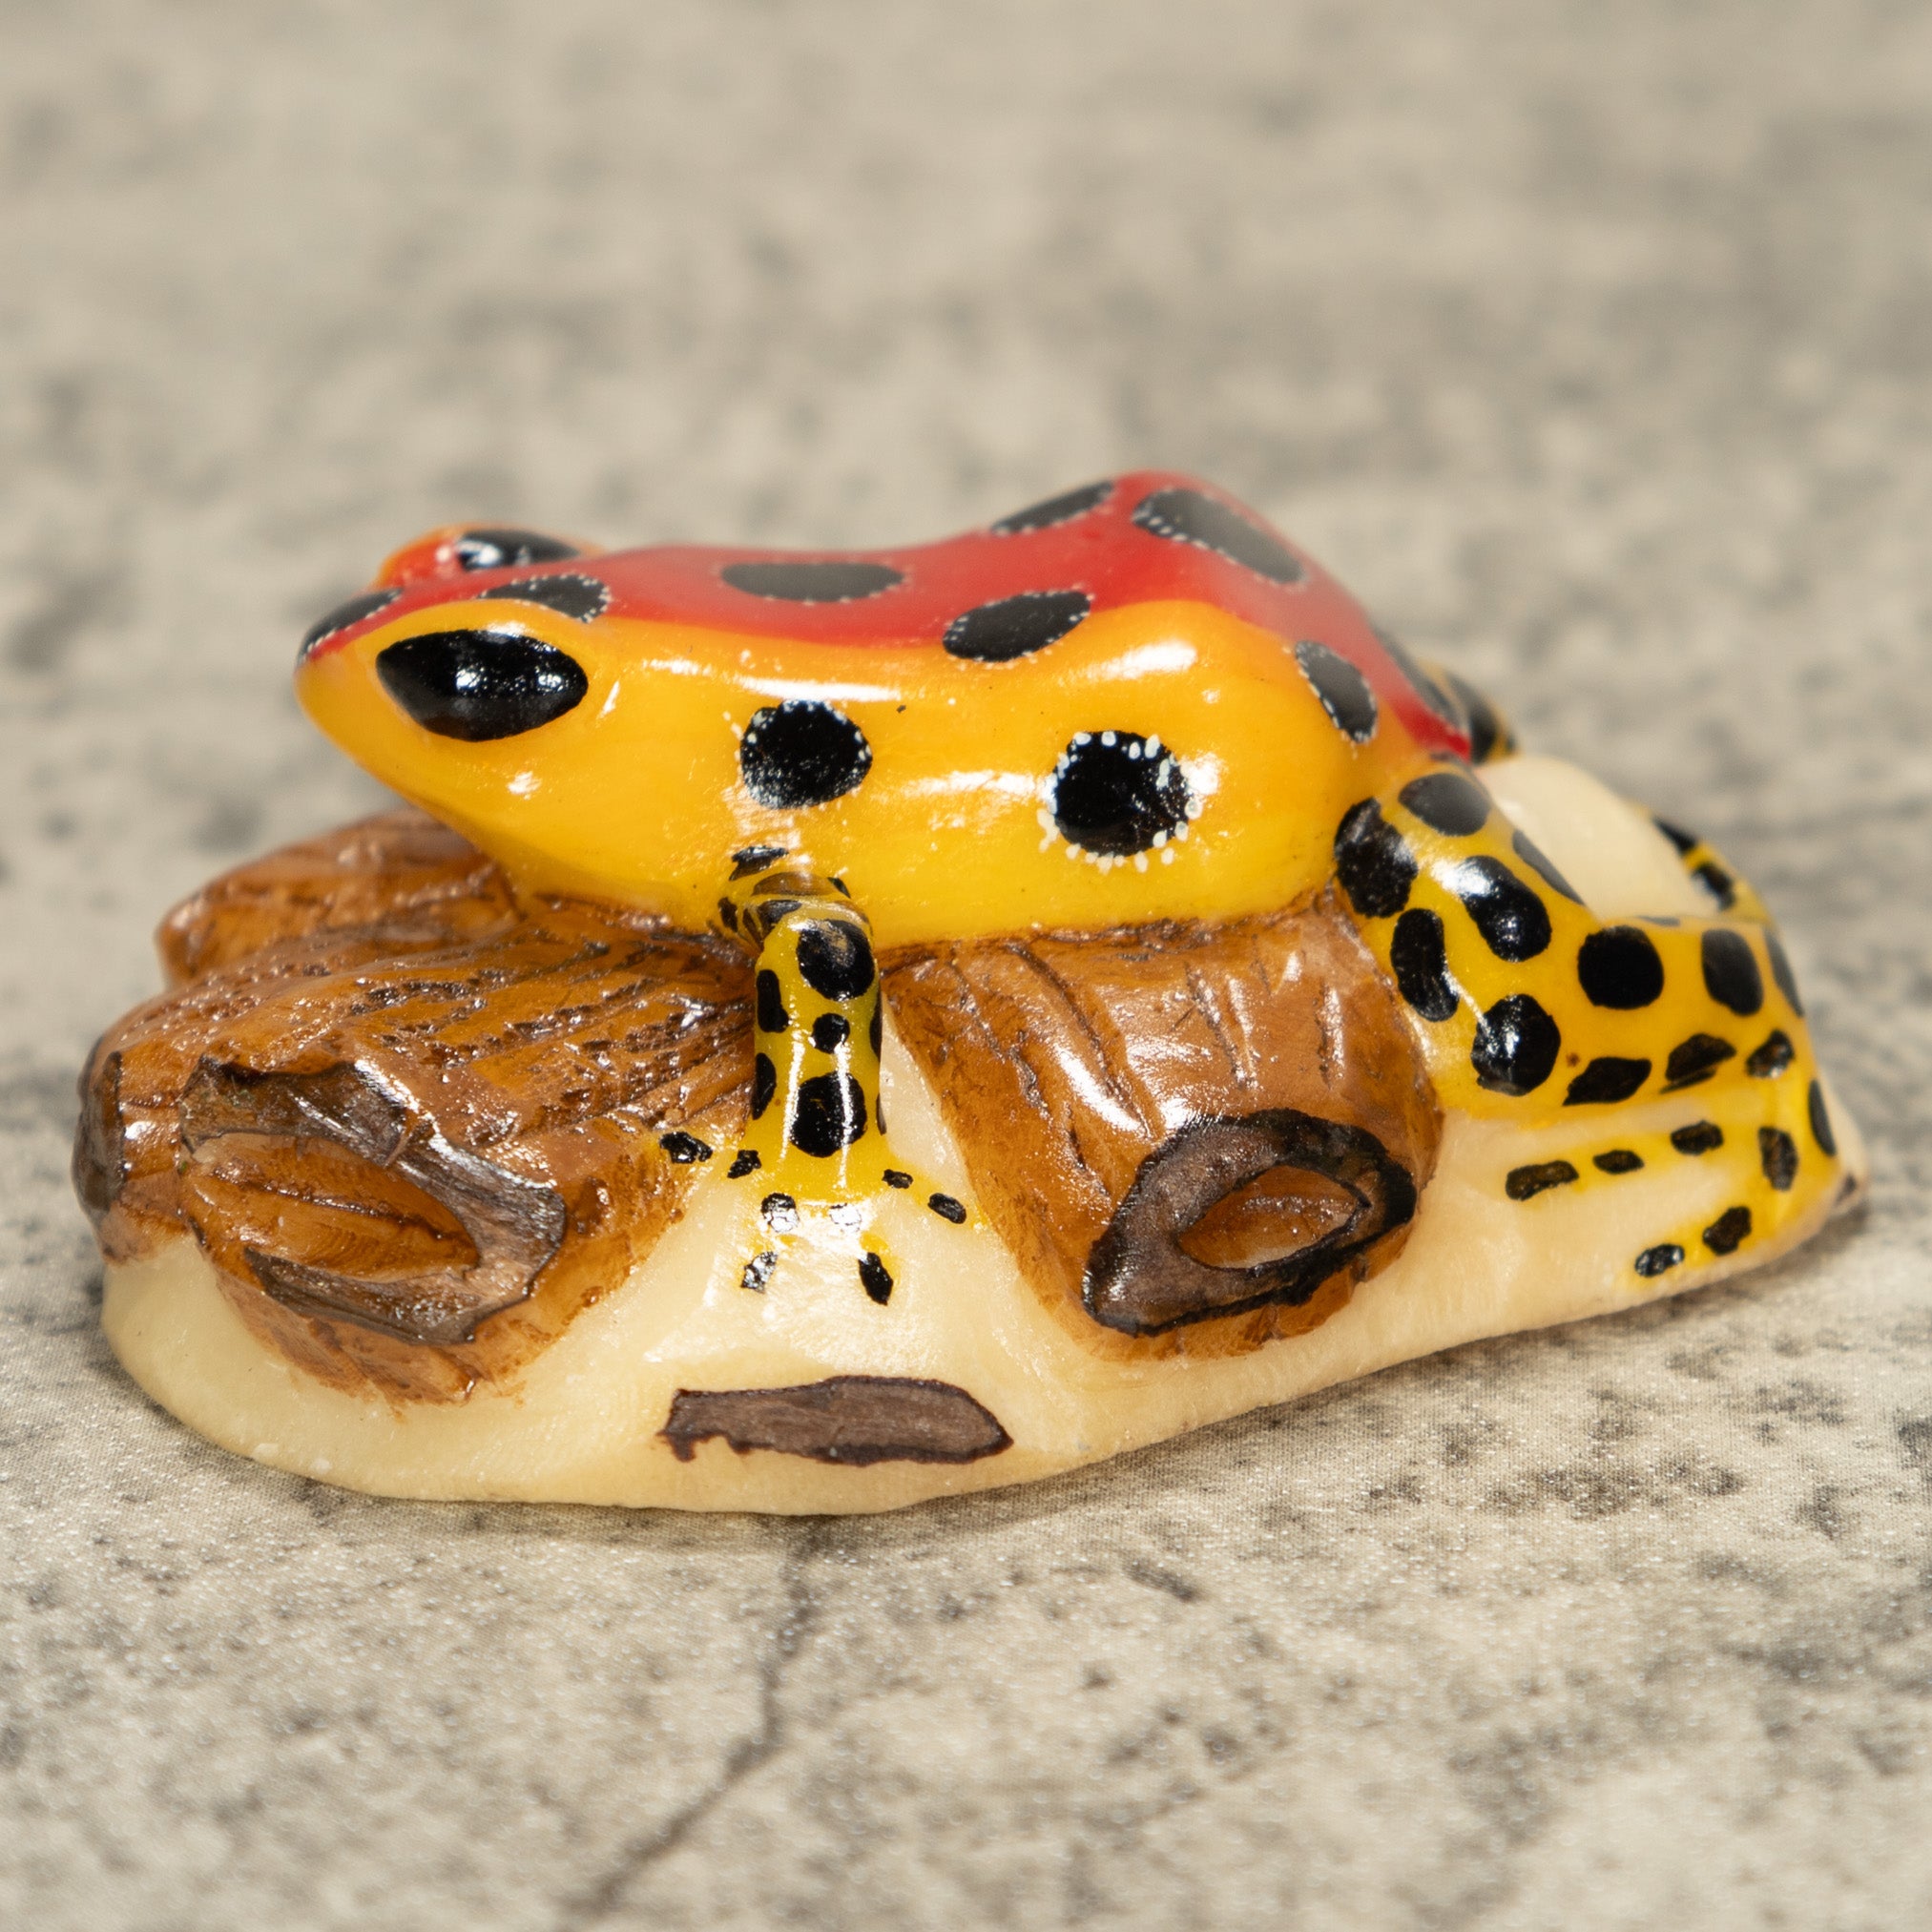 Red Poison Dart Frog On Log Tagua Nut Carving